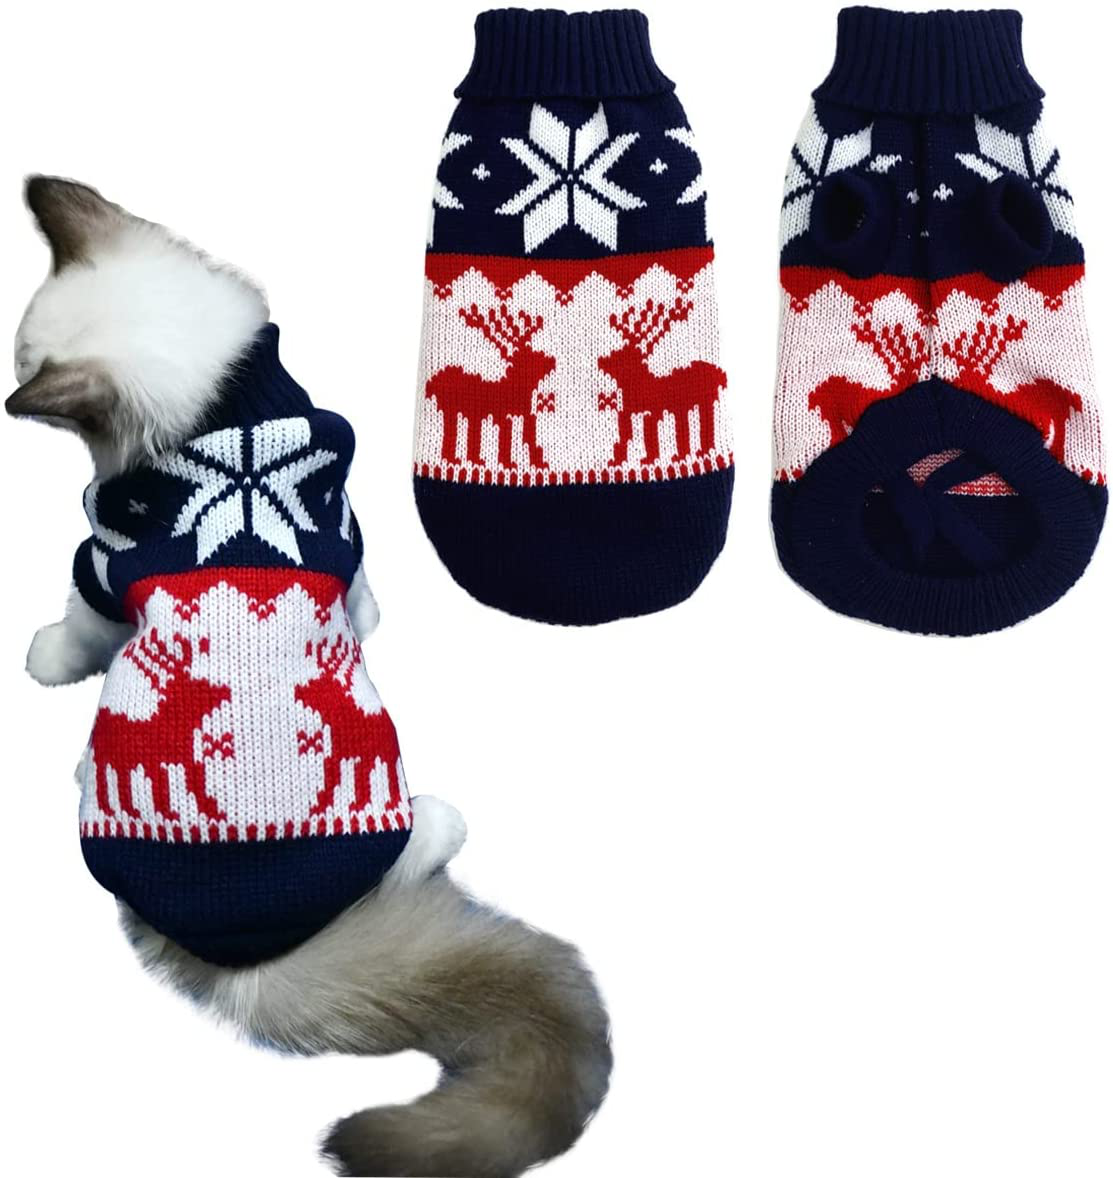 Vehomy Pet Puppy Christmas Sweater Cat Winter Knitwear Xmas Clothes Navy Blue Sweater with Reindeers Snowflakes Pattern Dog Warm Argyle Sweater Coat for Kittens Small Dogs Cats Animals & Pet Supplies > Pet Supplies > Dog Supplies > Dog Apparel Vehomy Small  